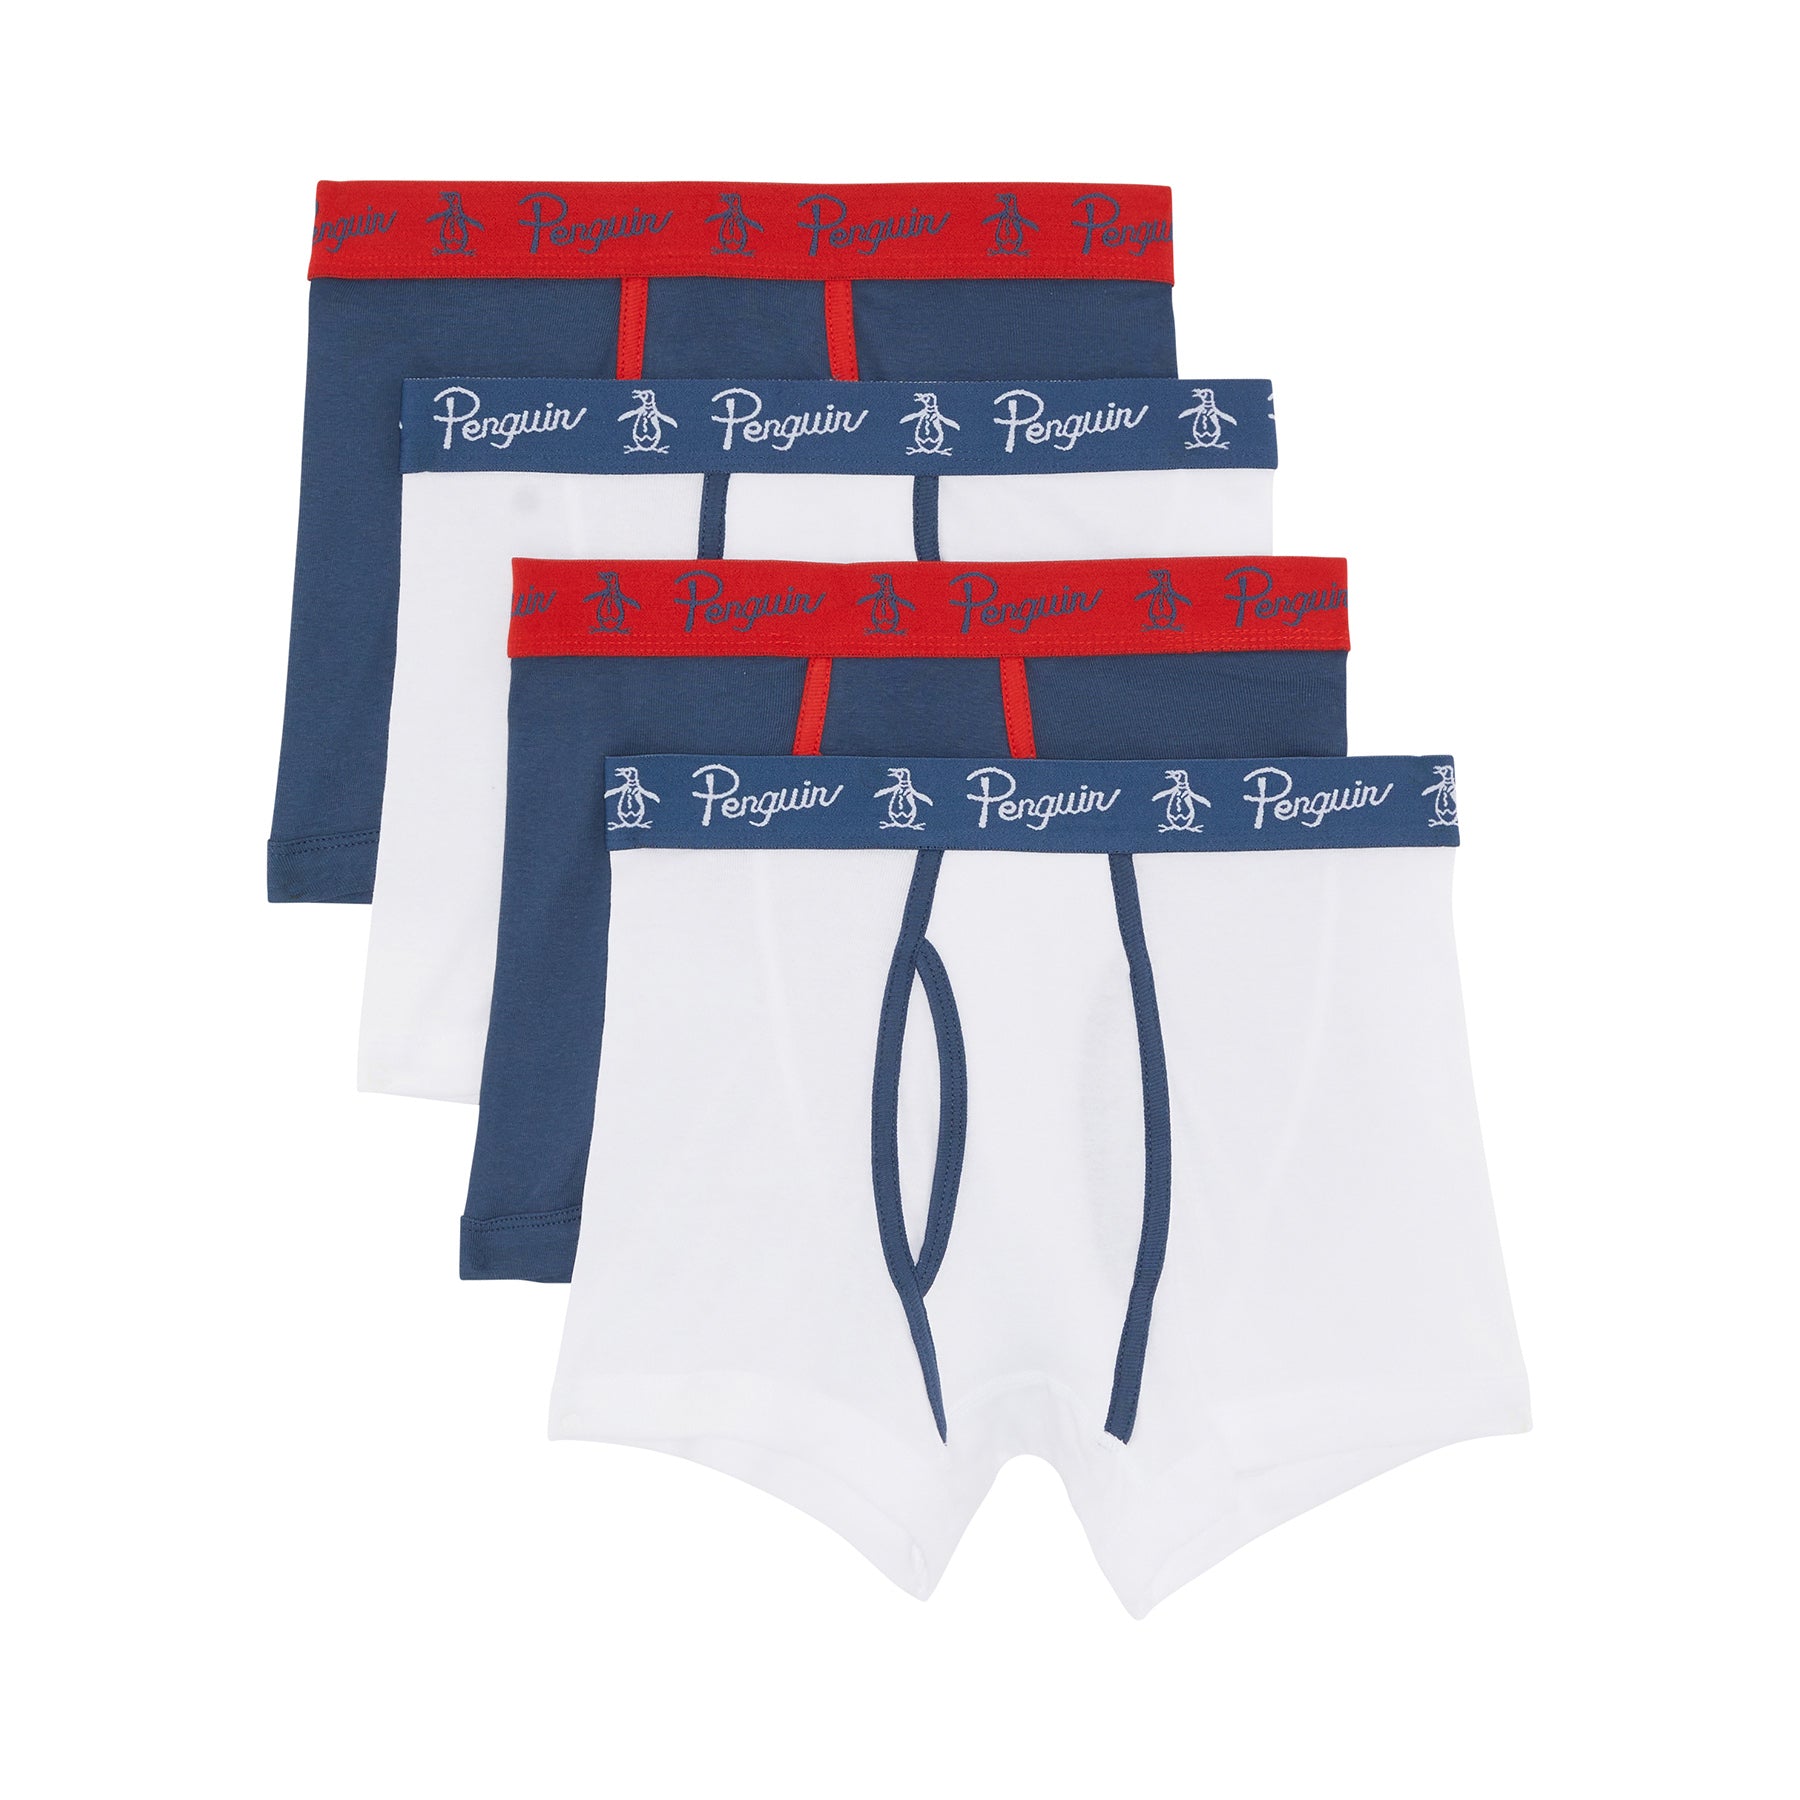 View 4 Pack Keyhole Underwear In Red Navy And White information